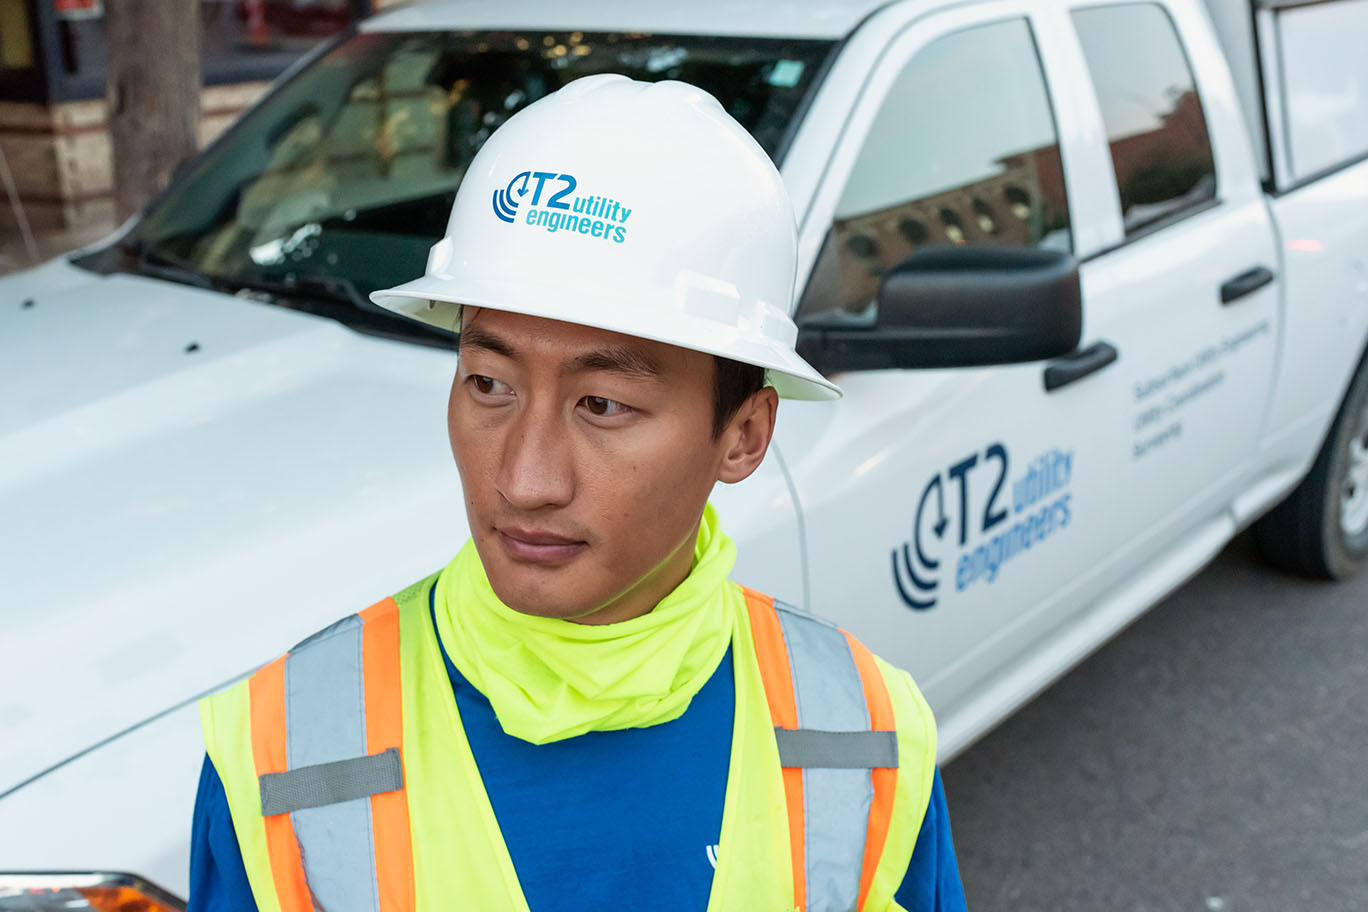 Commercial photographty Golden Colorado near Denver depicts a T2 Utility engineer with COVID mask ready. The image, created for an advertising project for the utilities firm features an Asian American engineer looking off camera with logos on his hardhat and on service vehicle behind him.